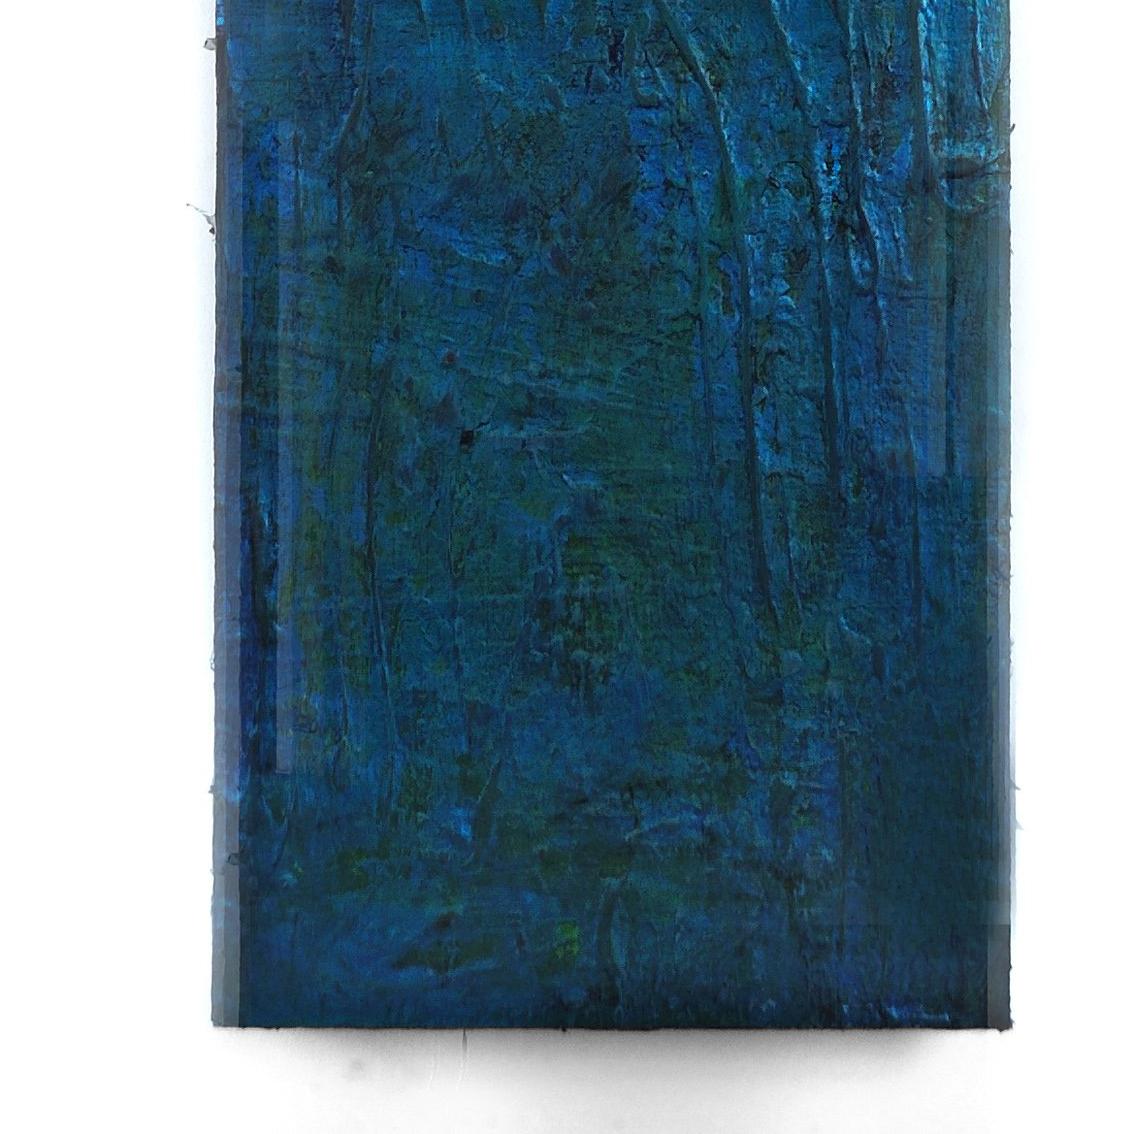 Strata 18-1, acrylic and wax on metal, 58 x 12 inches. Blue and green sectors - Painting by Francie Hester